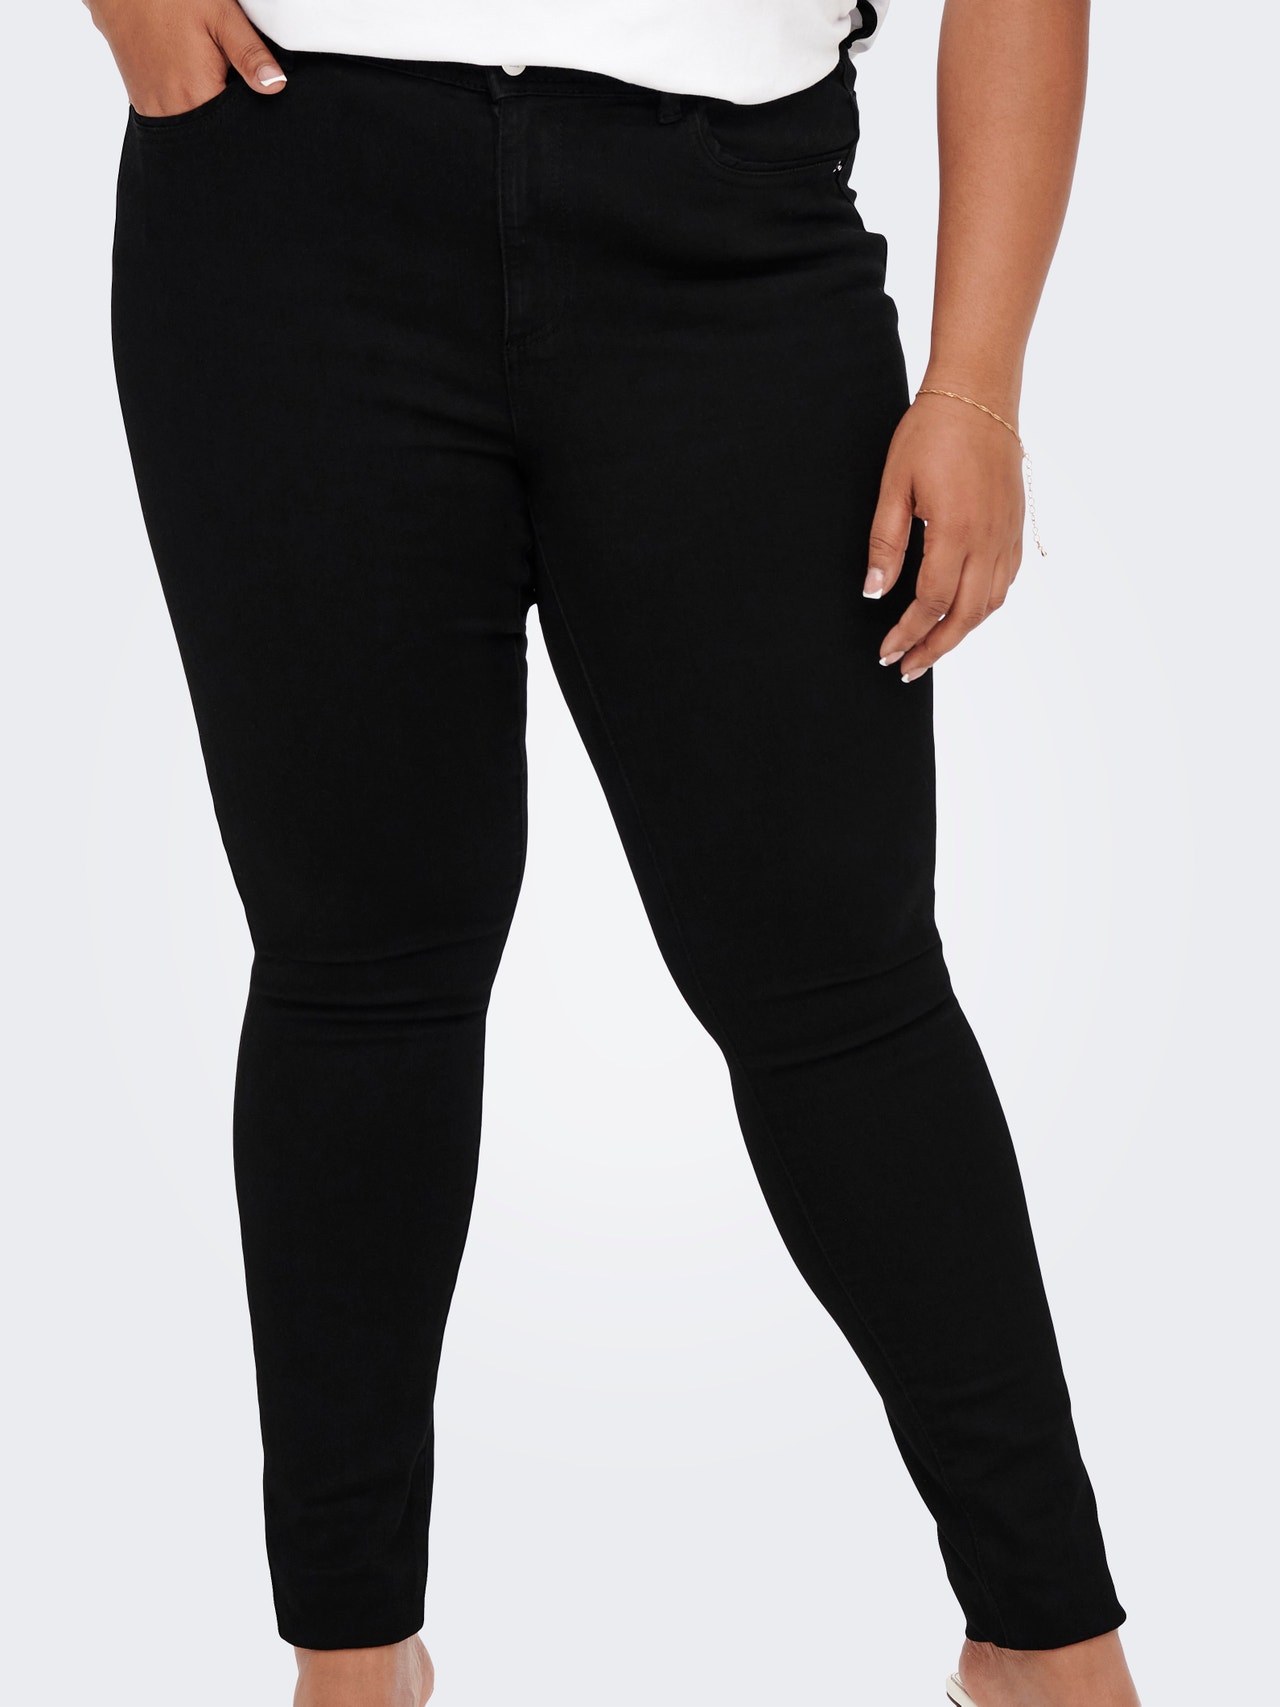 ONLY Jeans Skinny Fit Taille moyenne Curve -Black Denim - 15263091